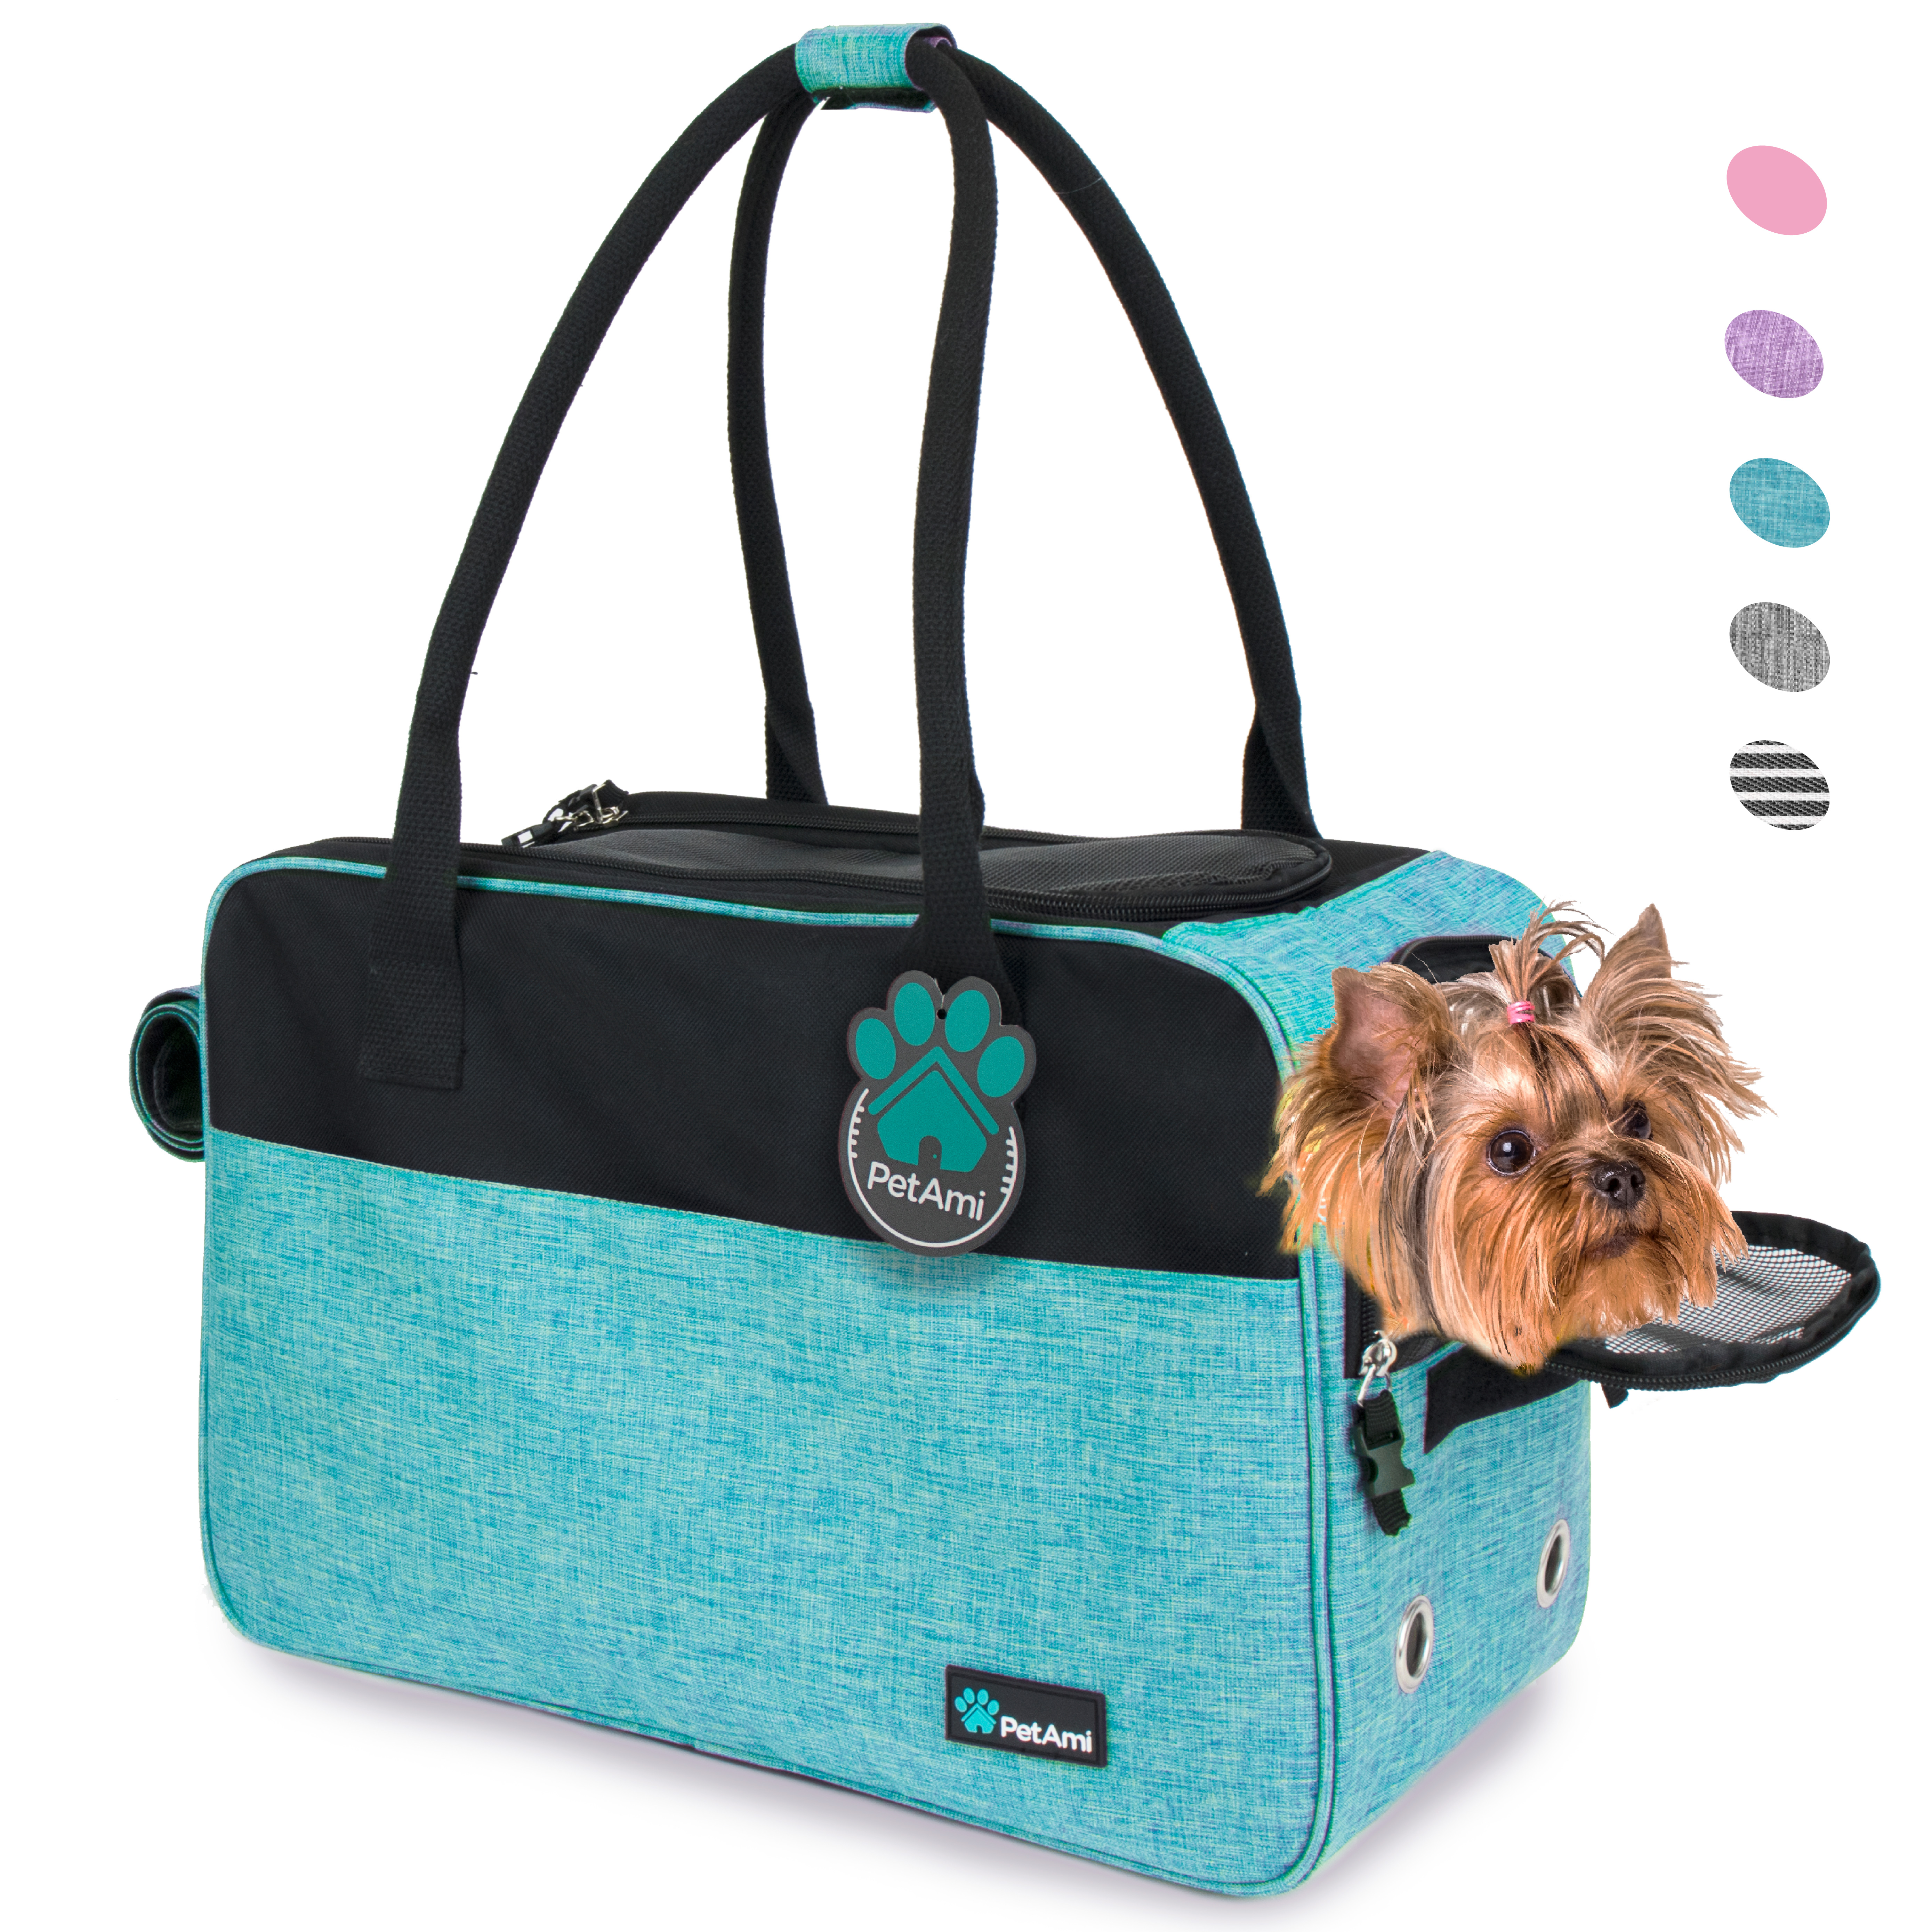 Shamrock Green 2015 Newly Designed OxGord Pet Carrier Soft Sided Cat / Dog Comfort FAA Airline Approved Travel Tote Bag Small 